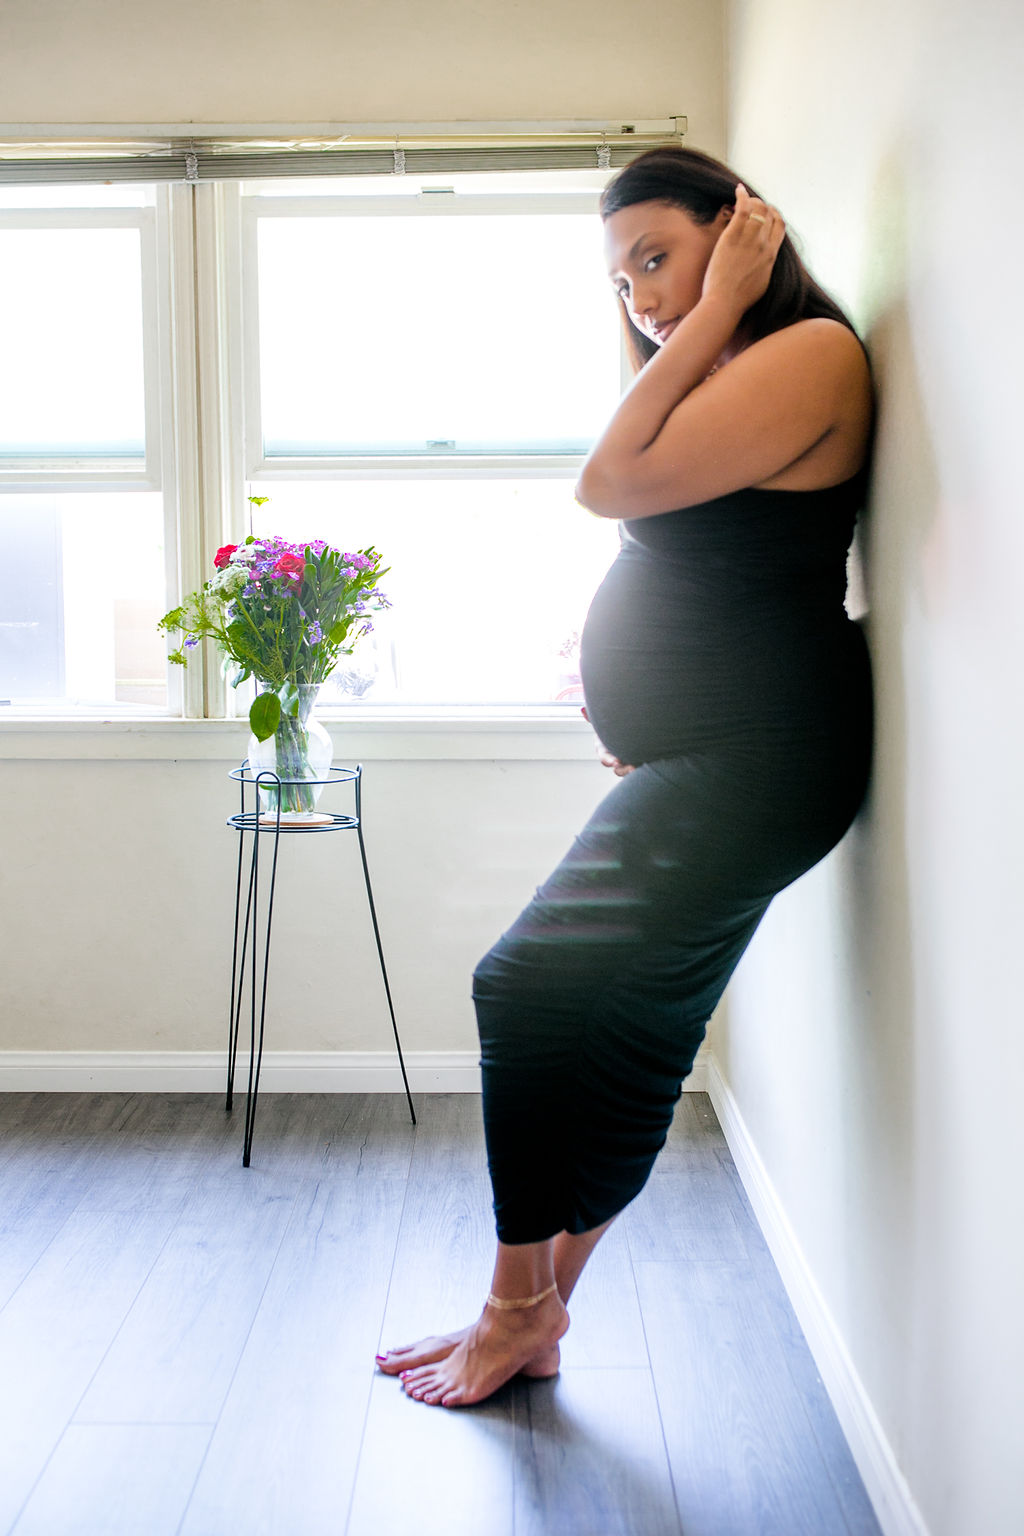 maternity shoot-33 weeks pregnant-pink blush dress-maternity dress-flowers-rsee-liveclothesminded-natural light